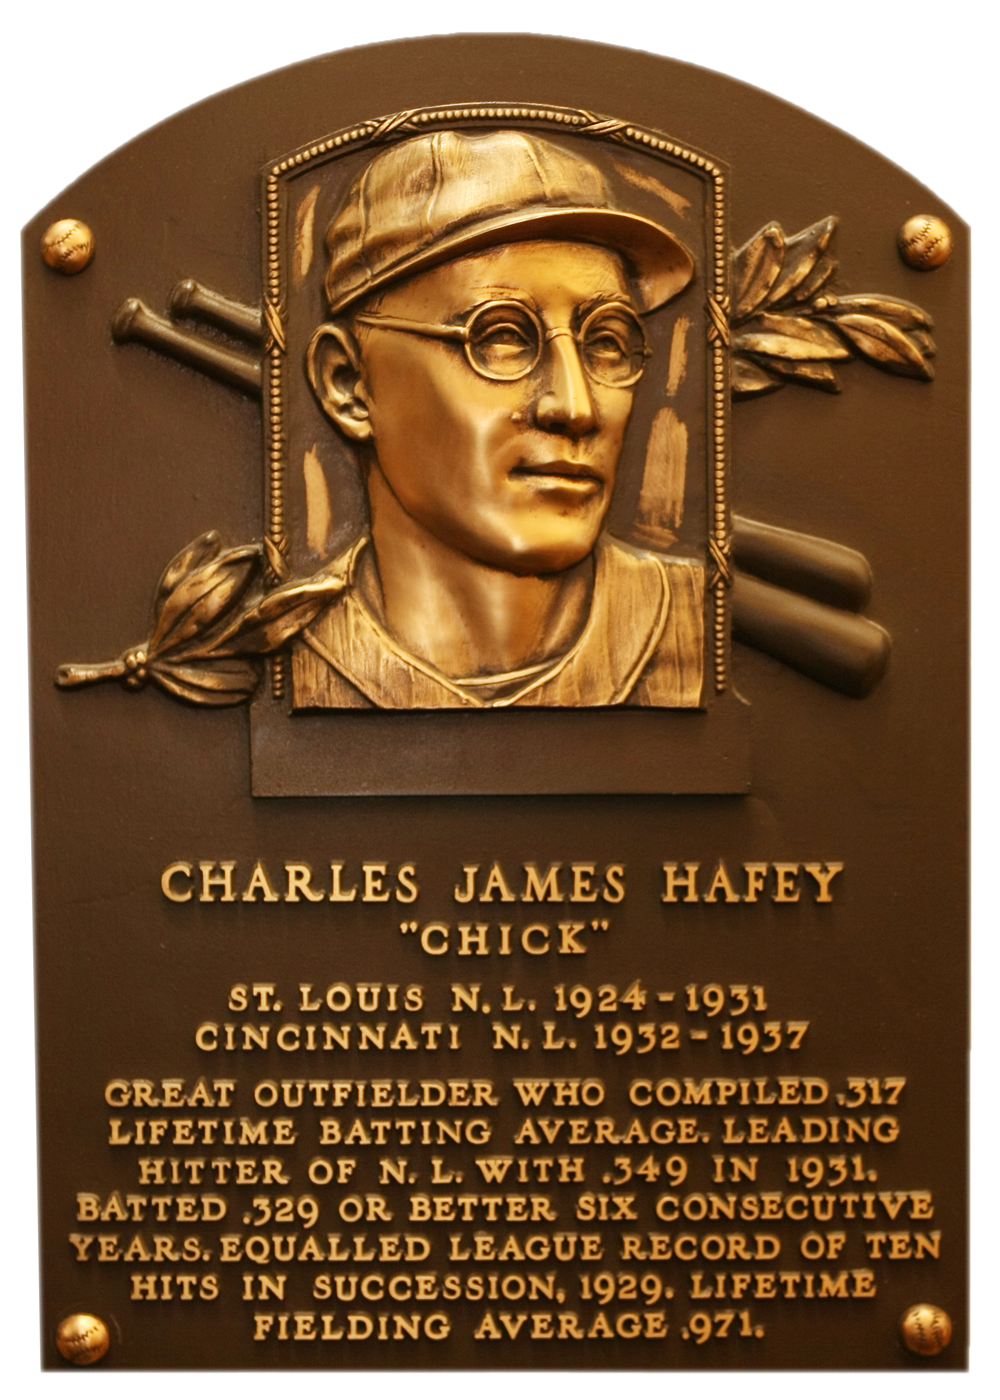 Chick Hafey Hall of Fame plaque